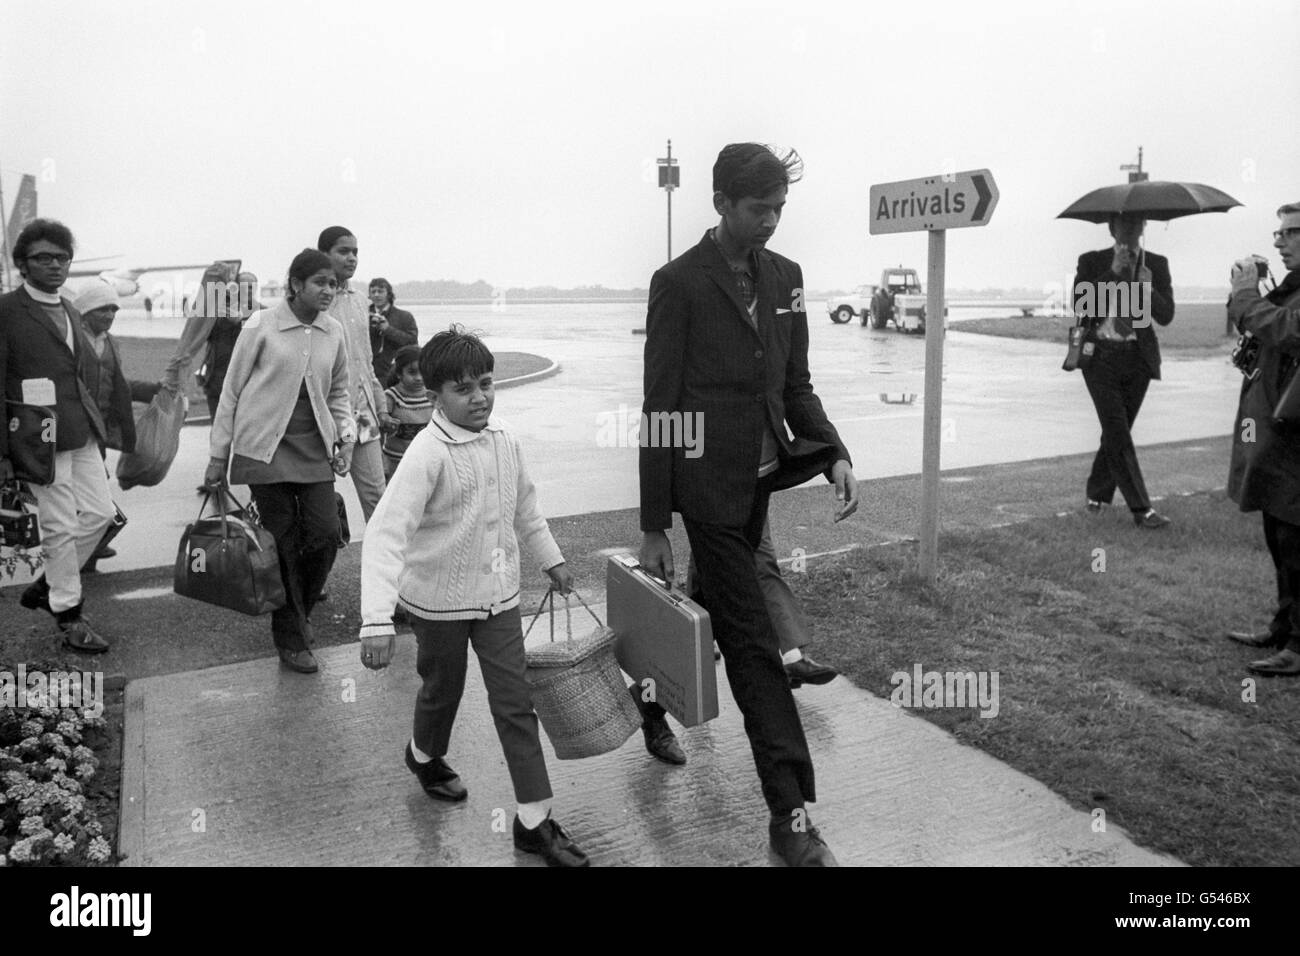 UGANDAN ASIANS 1972: Among the first arrivals to disembark from the specially chartered aircraft were these young men, women and children about to start a new life in this country away from the turmoil of Uganda. They are carrying some of their few belongings. Stock Photo